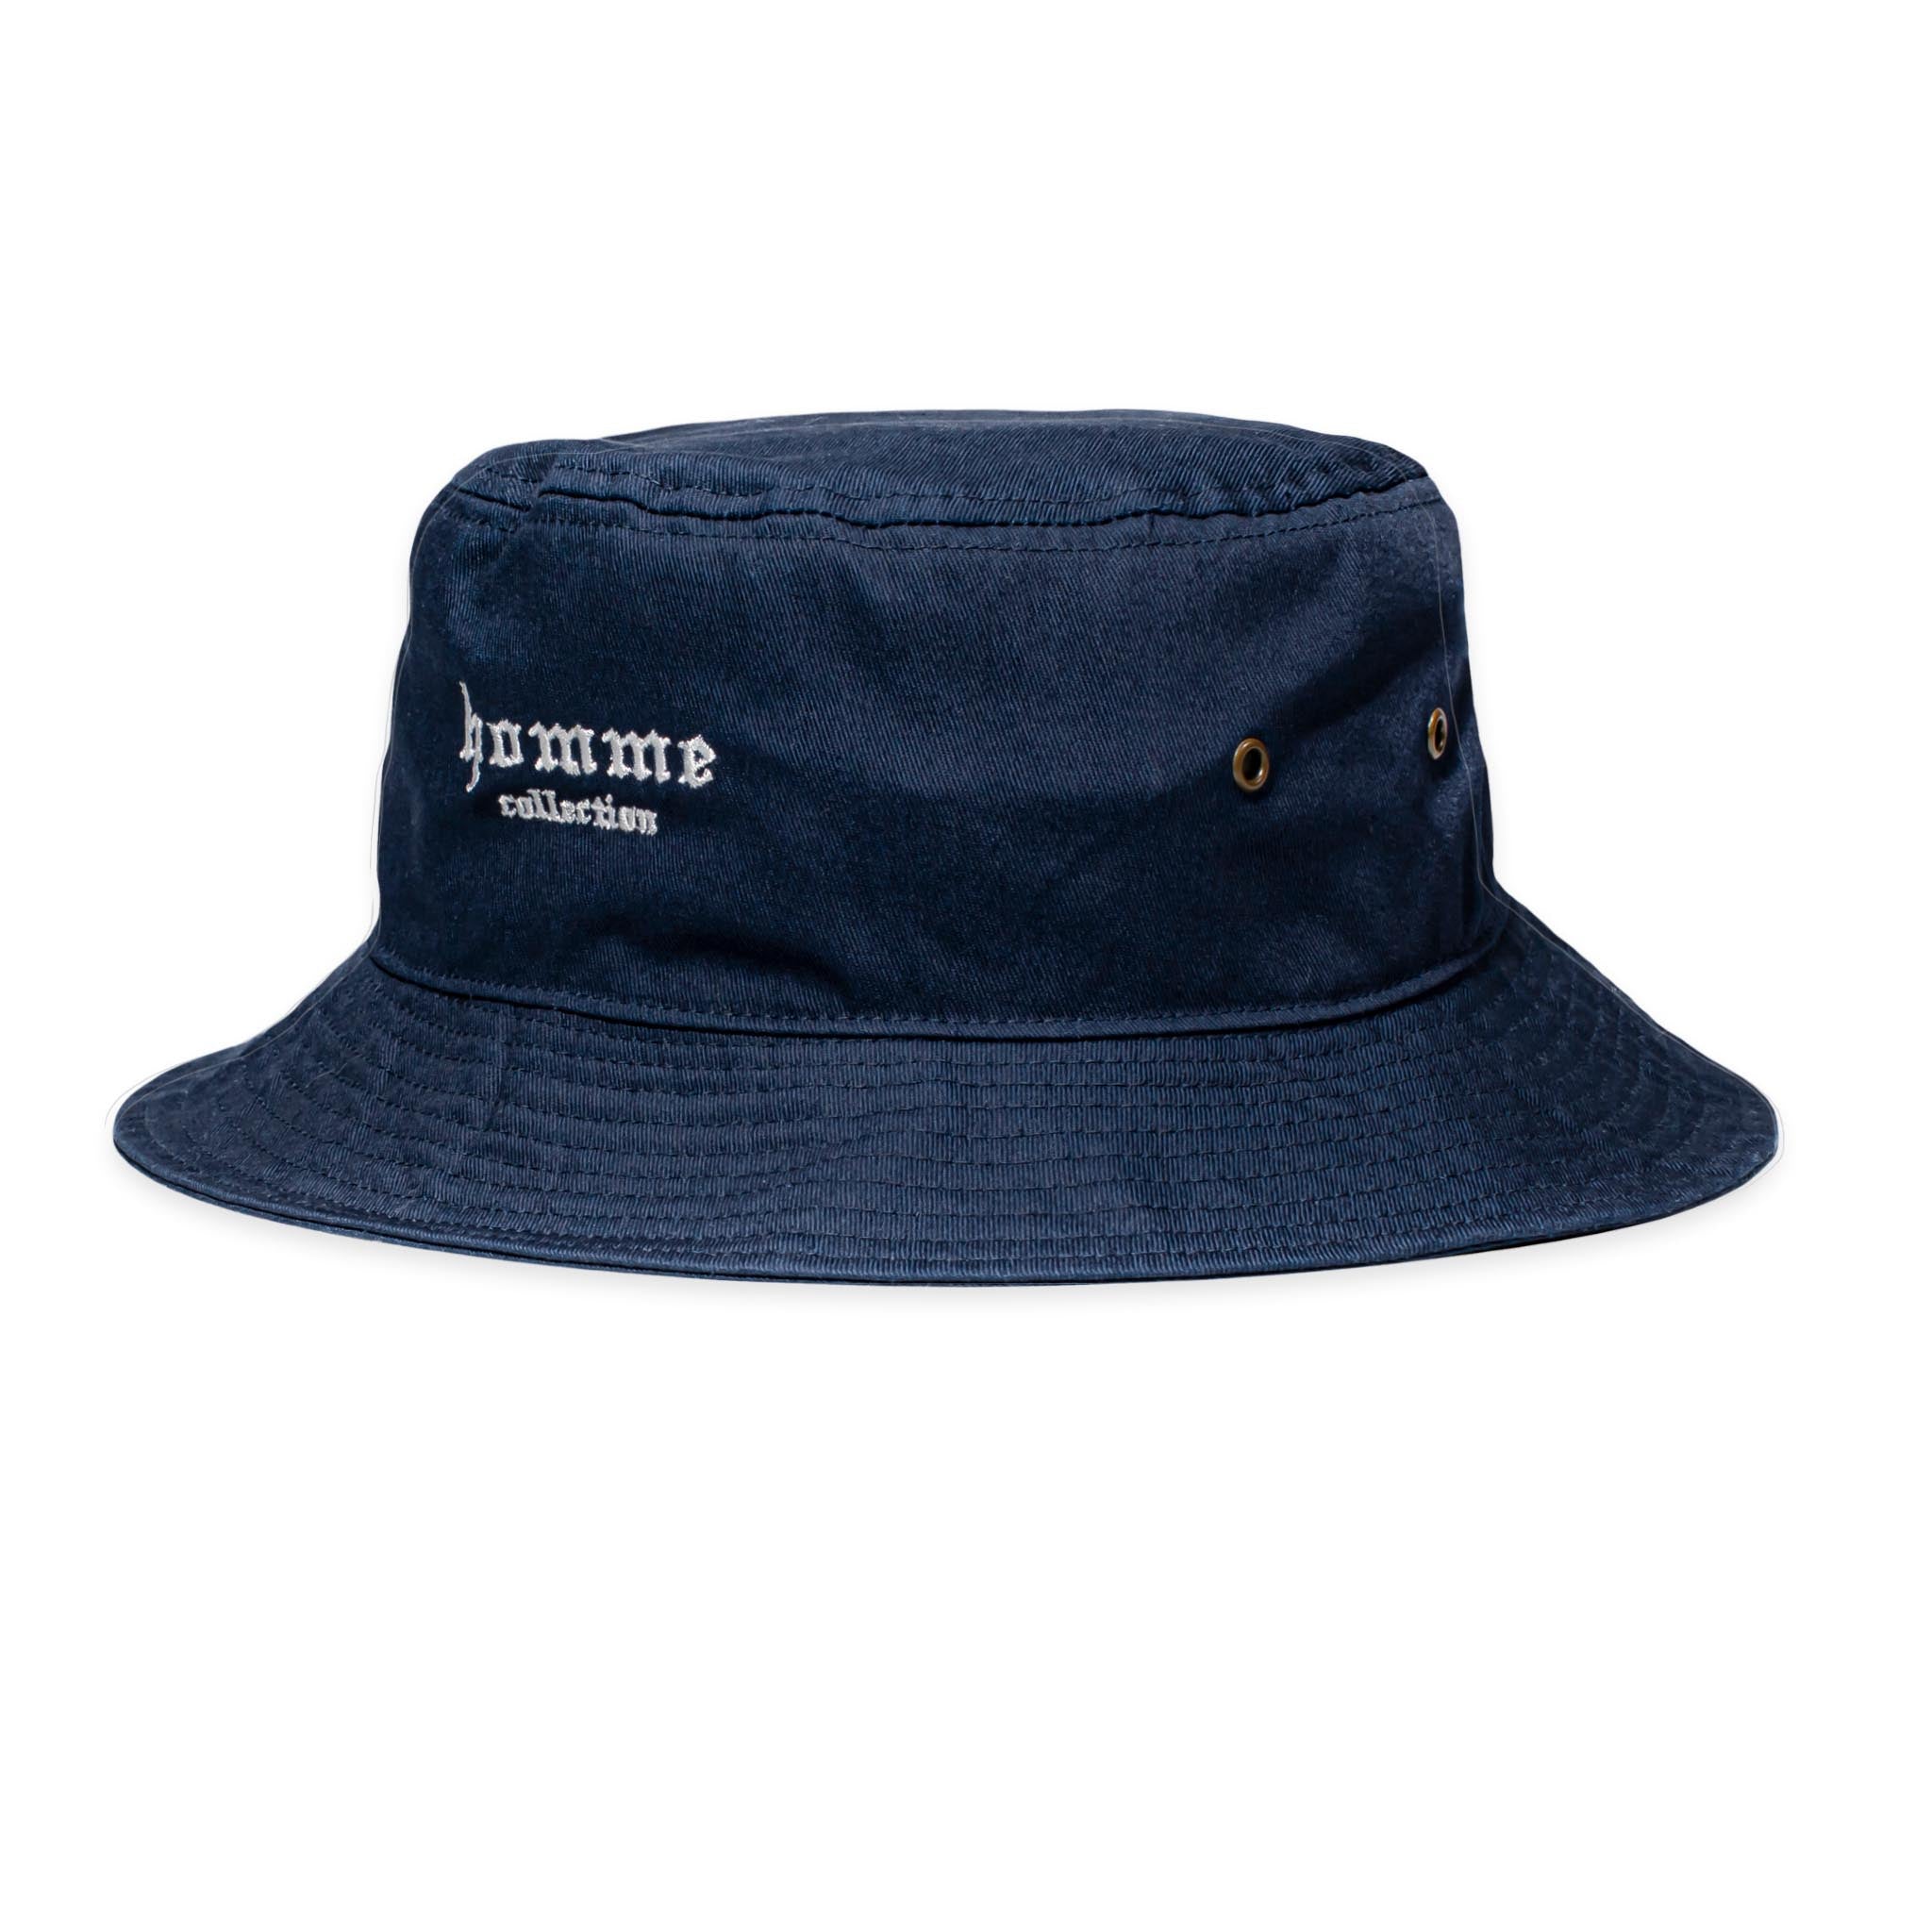 HOMME+ Collection Bucket Hat Navy